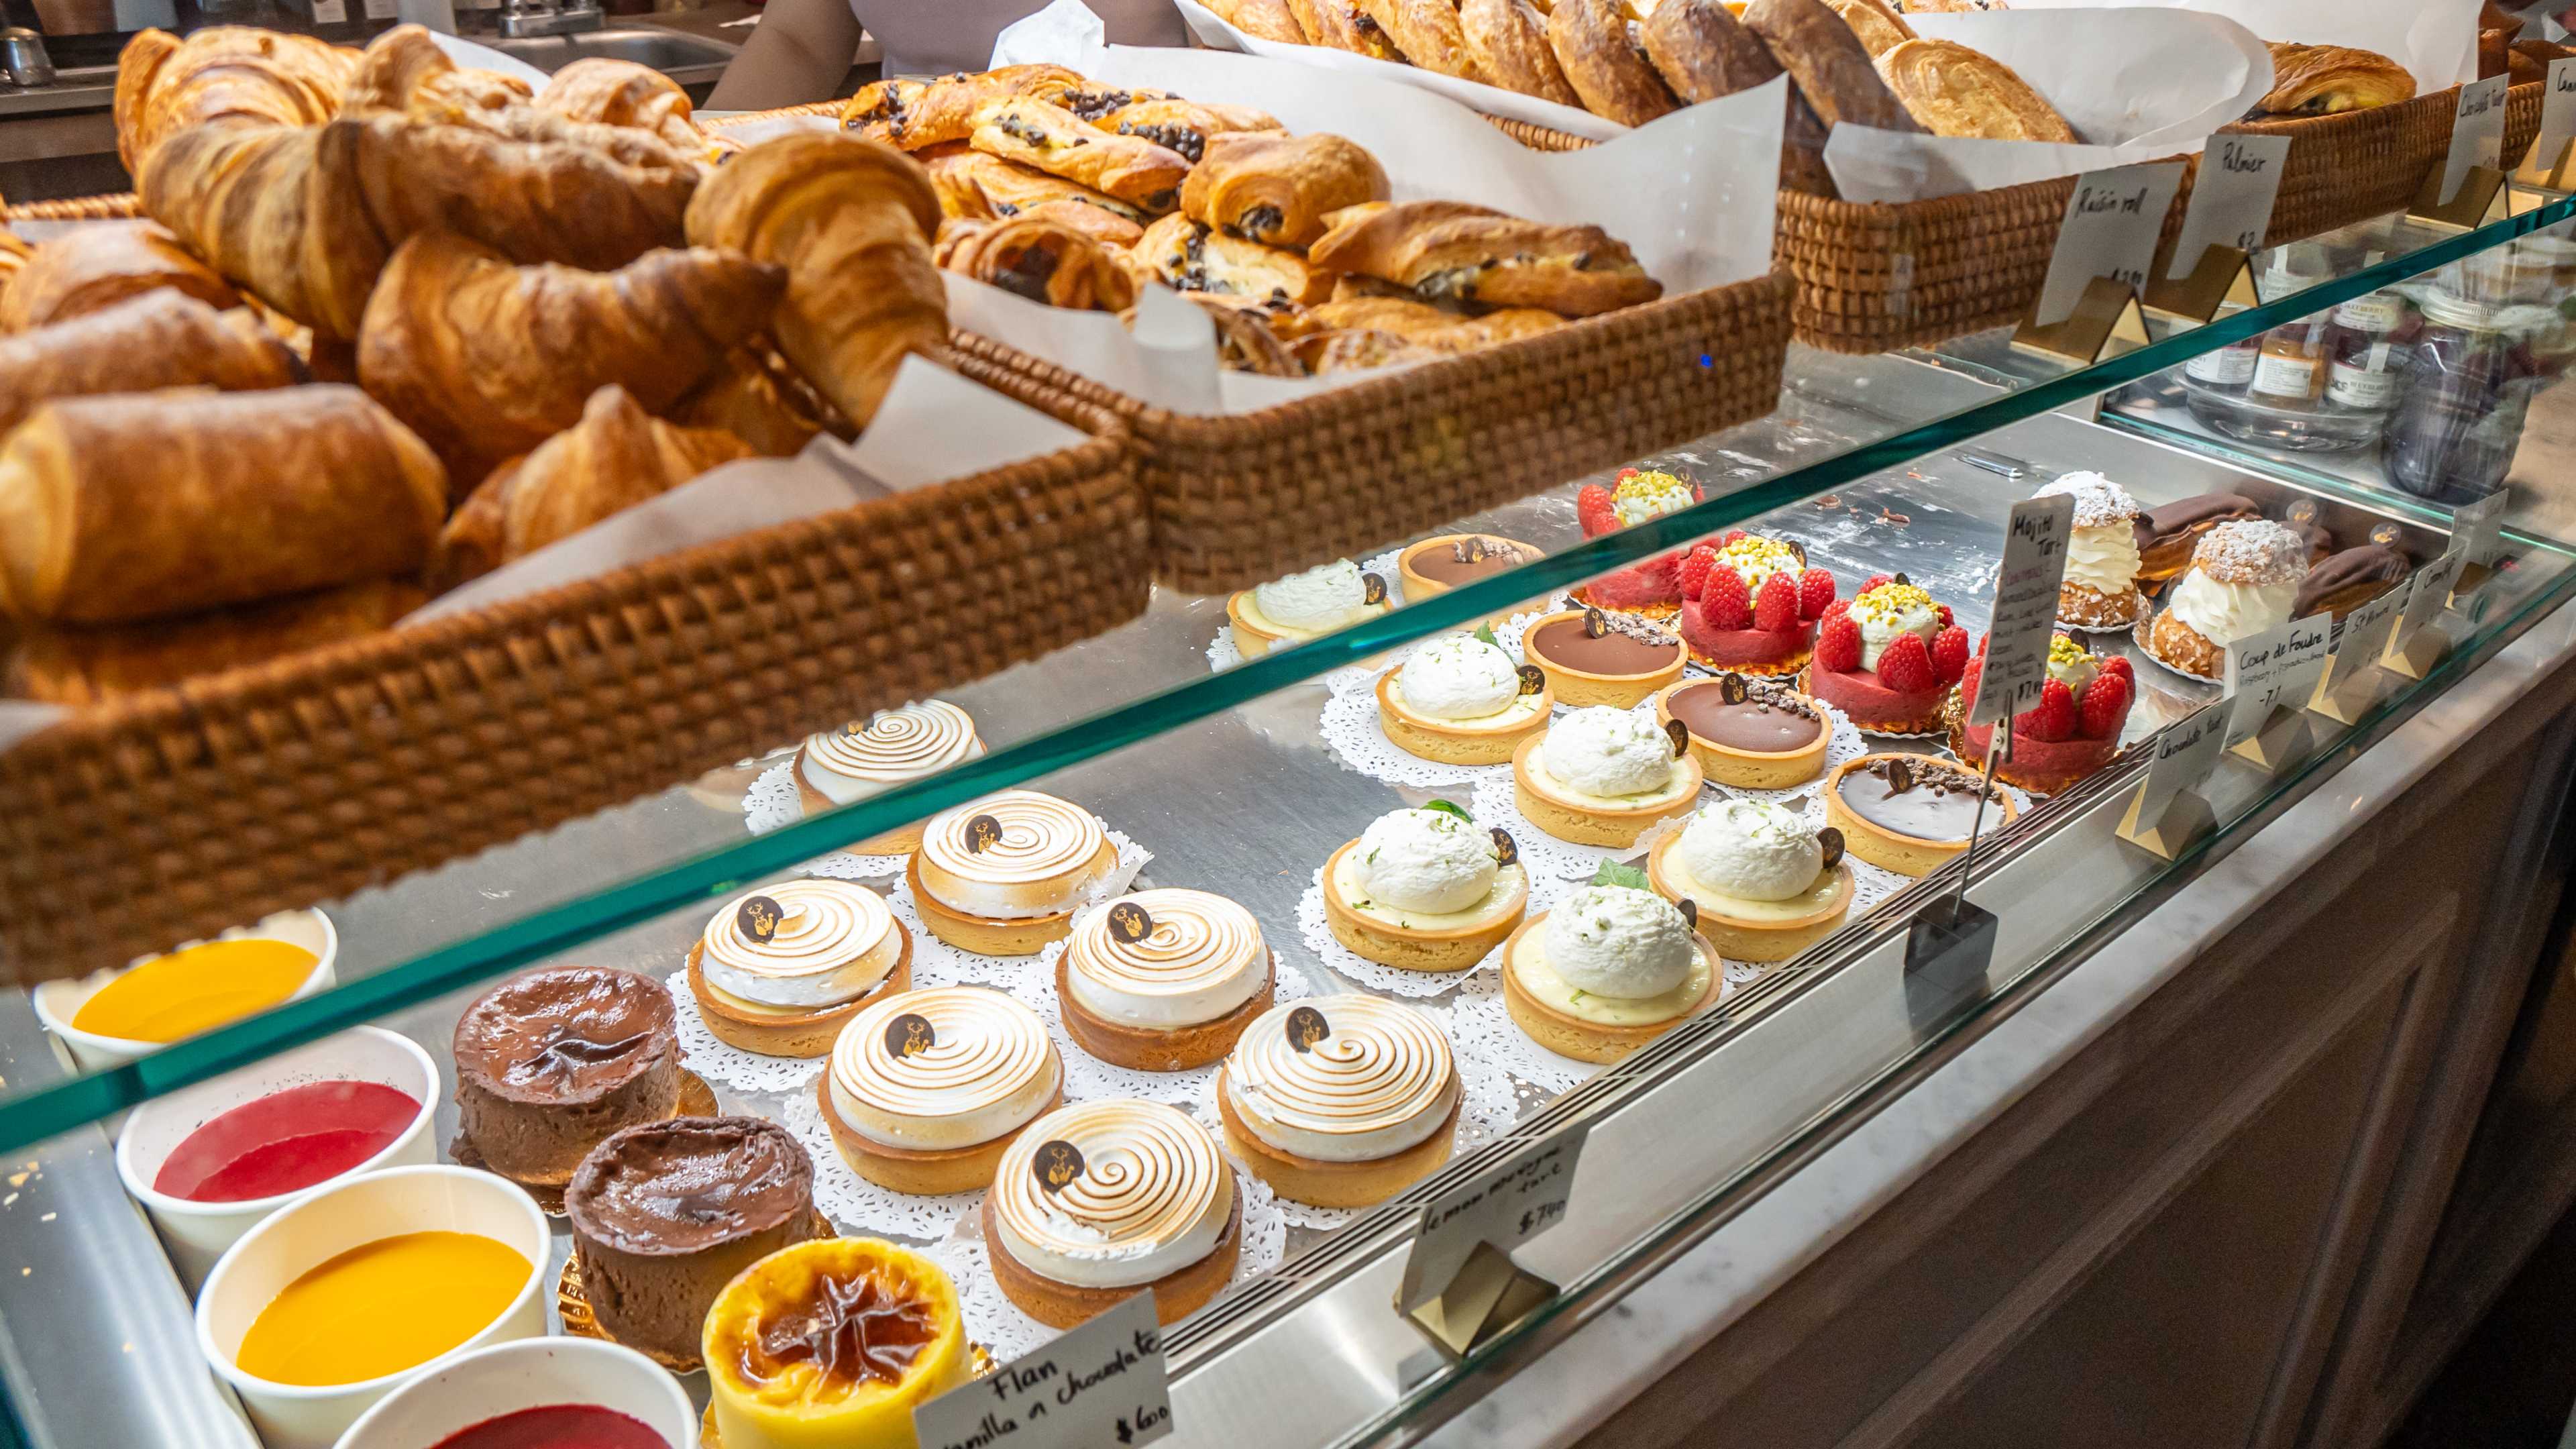 display case of pastries